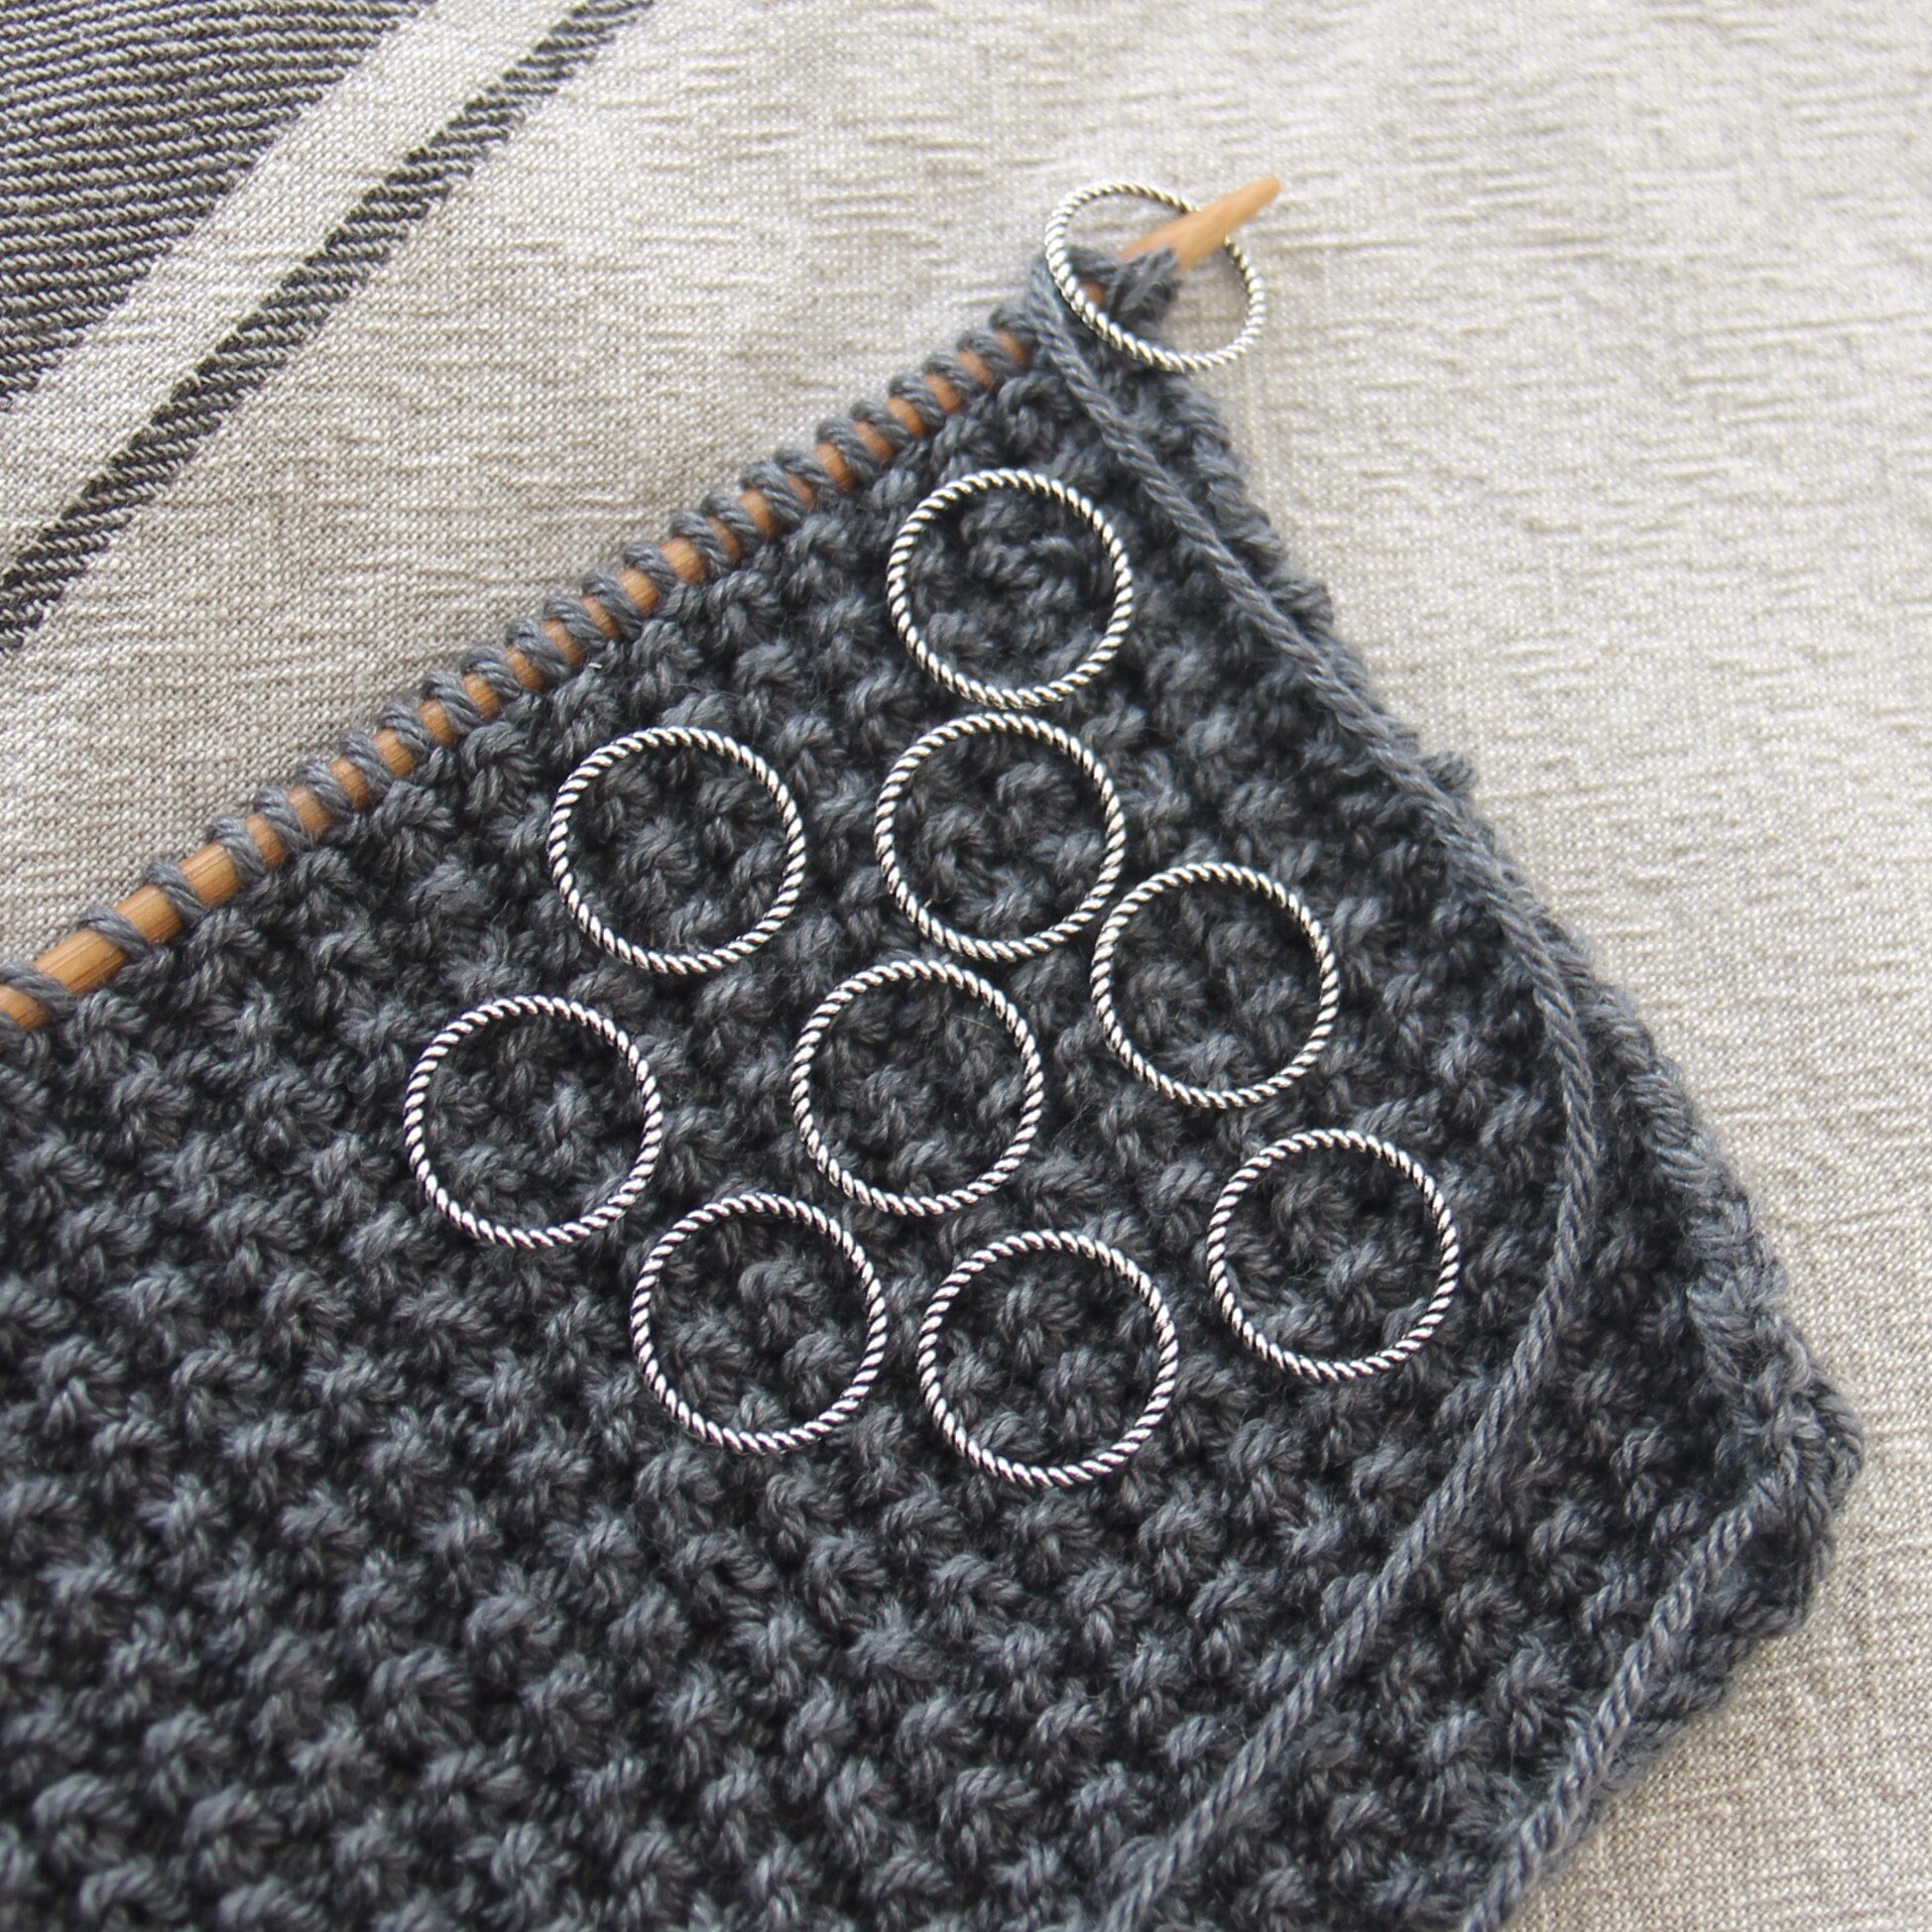 Large Stitch Markers for Knitting Needles - Set of 32 Seamless